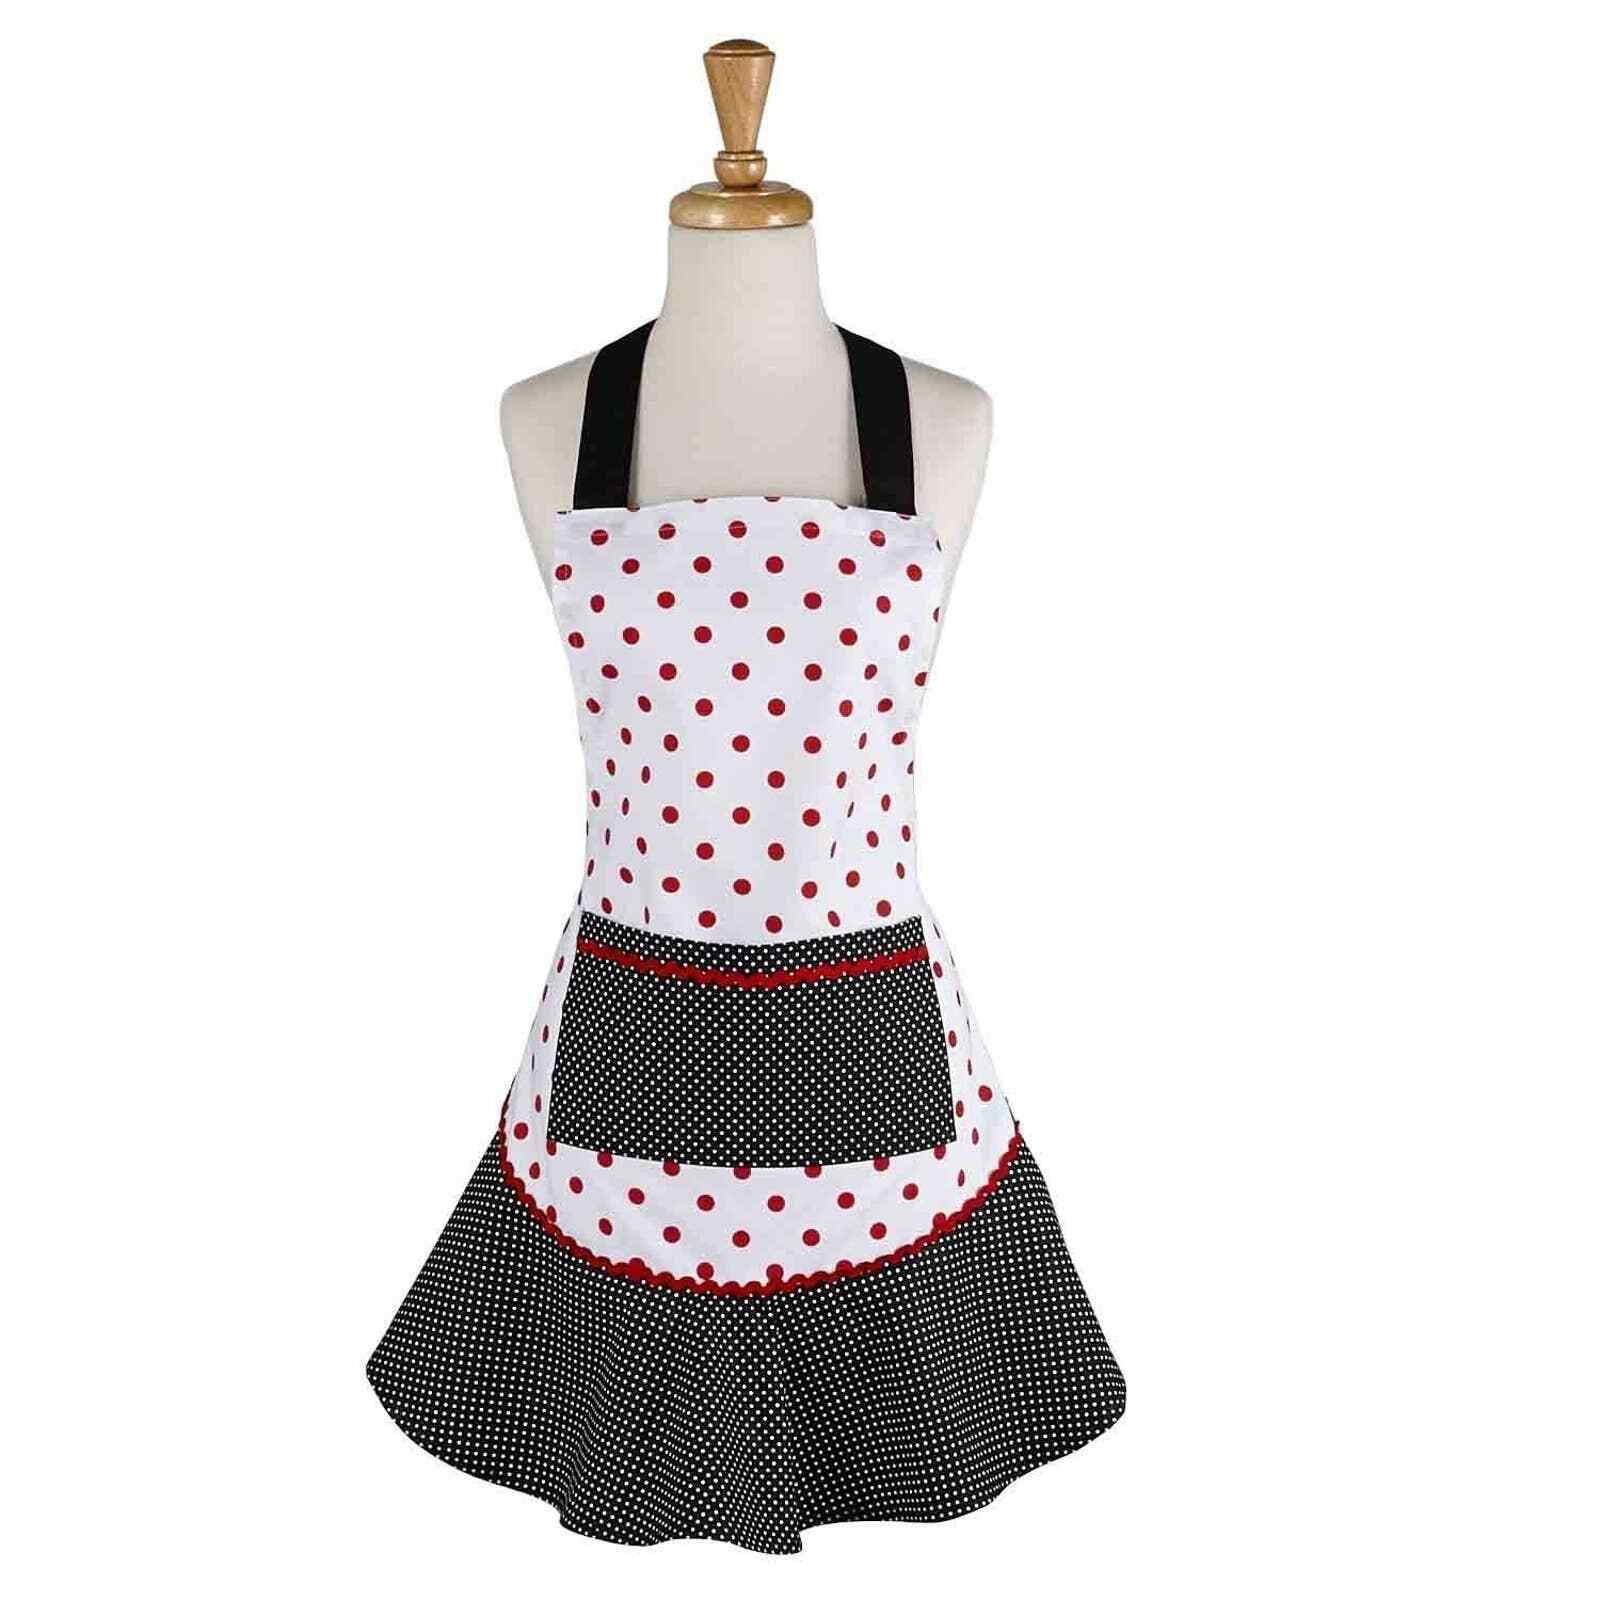 Cute Ruffle Apron For Cooking Black & Red Dot